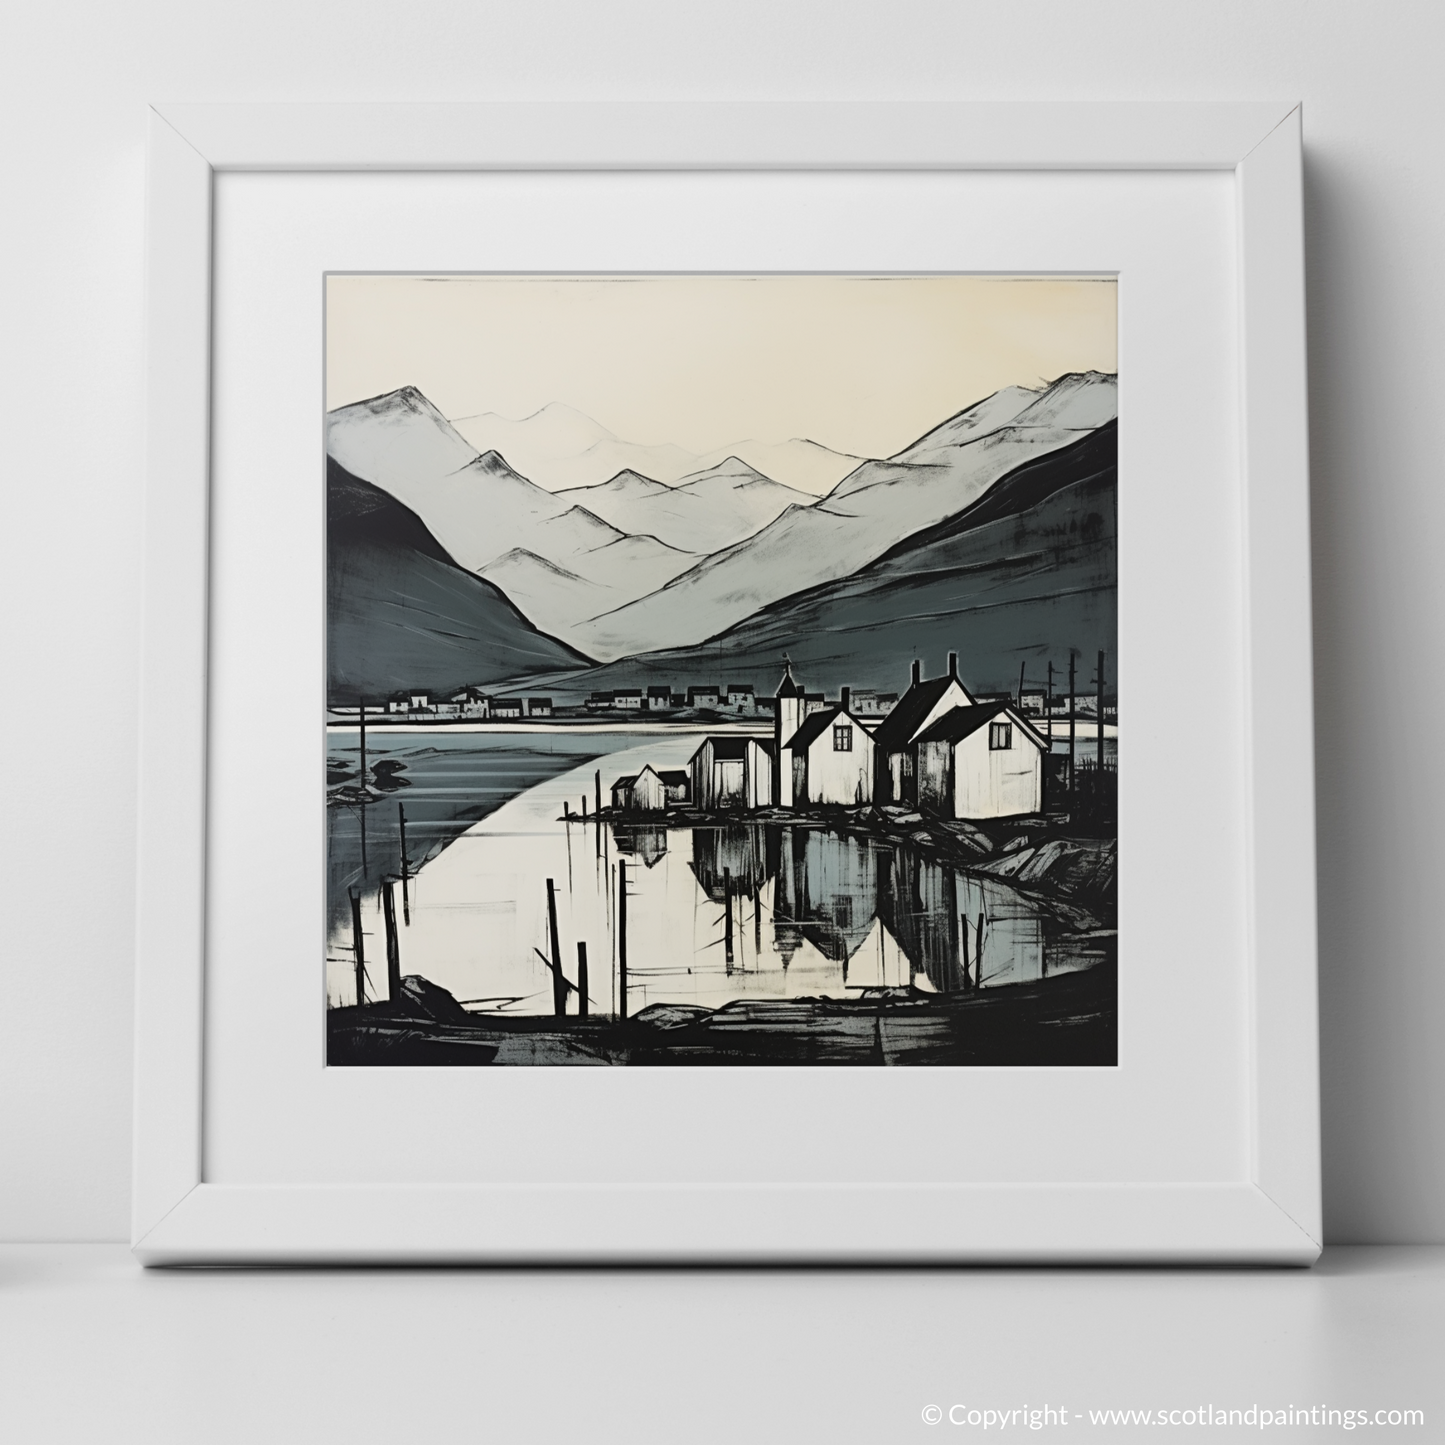 Painting and Art Print of Fort William, Highlands. Fort William Reflections: Highland Serenity in Monochrome.